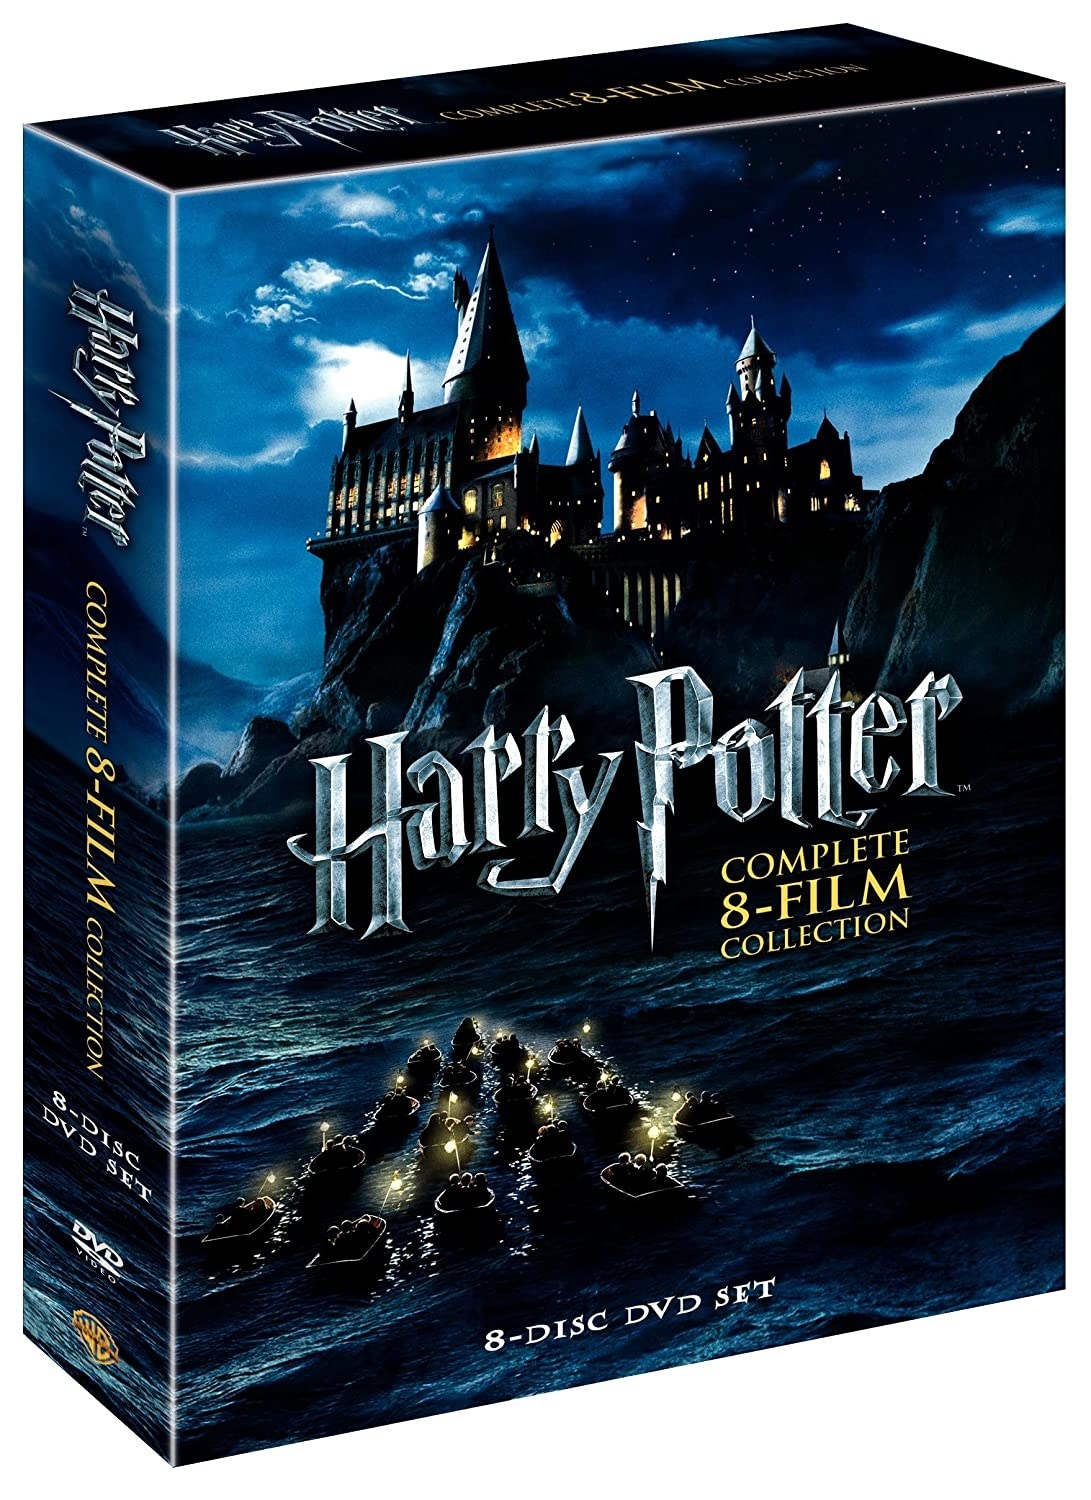 Cover of the box set